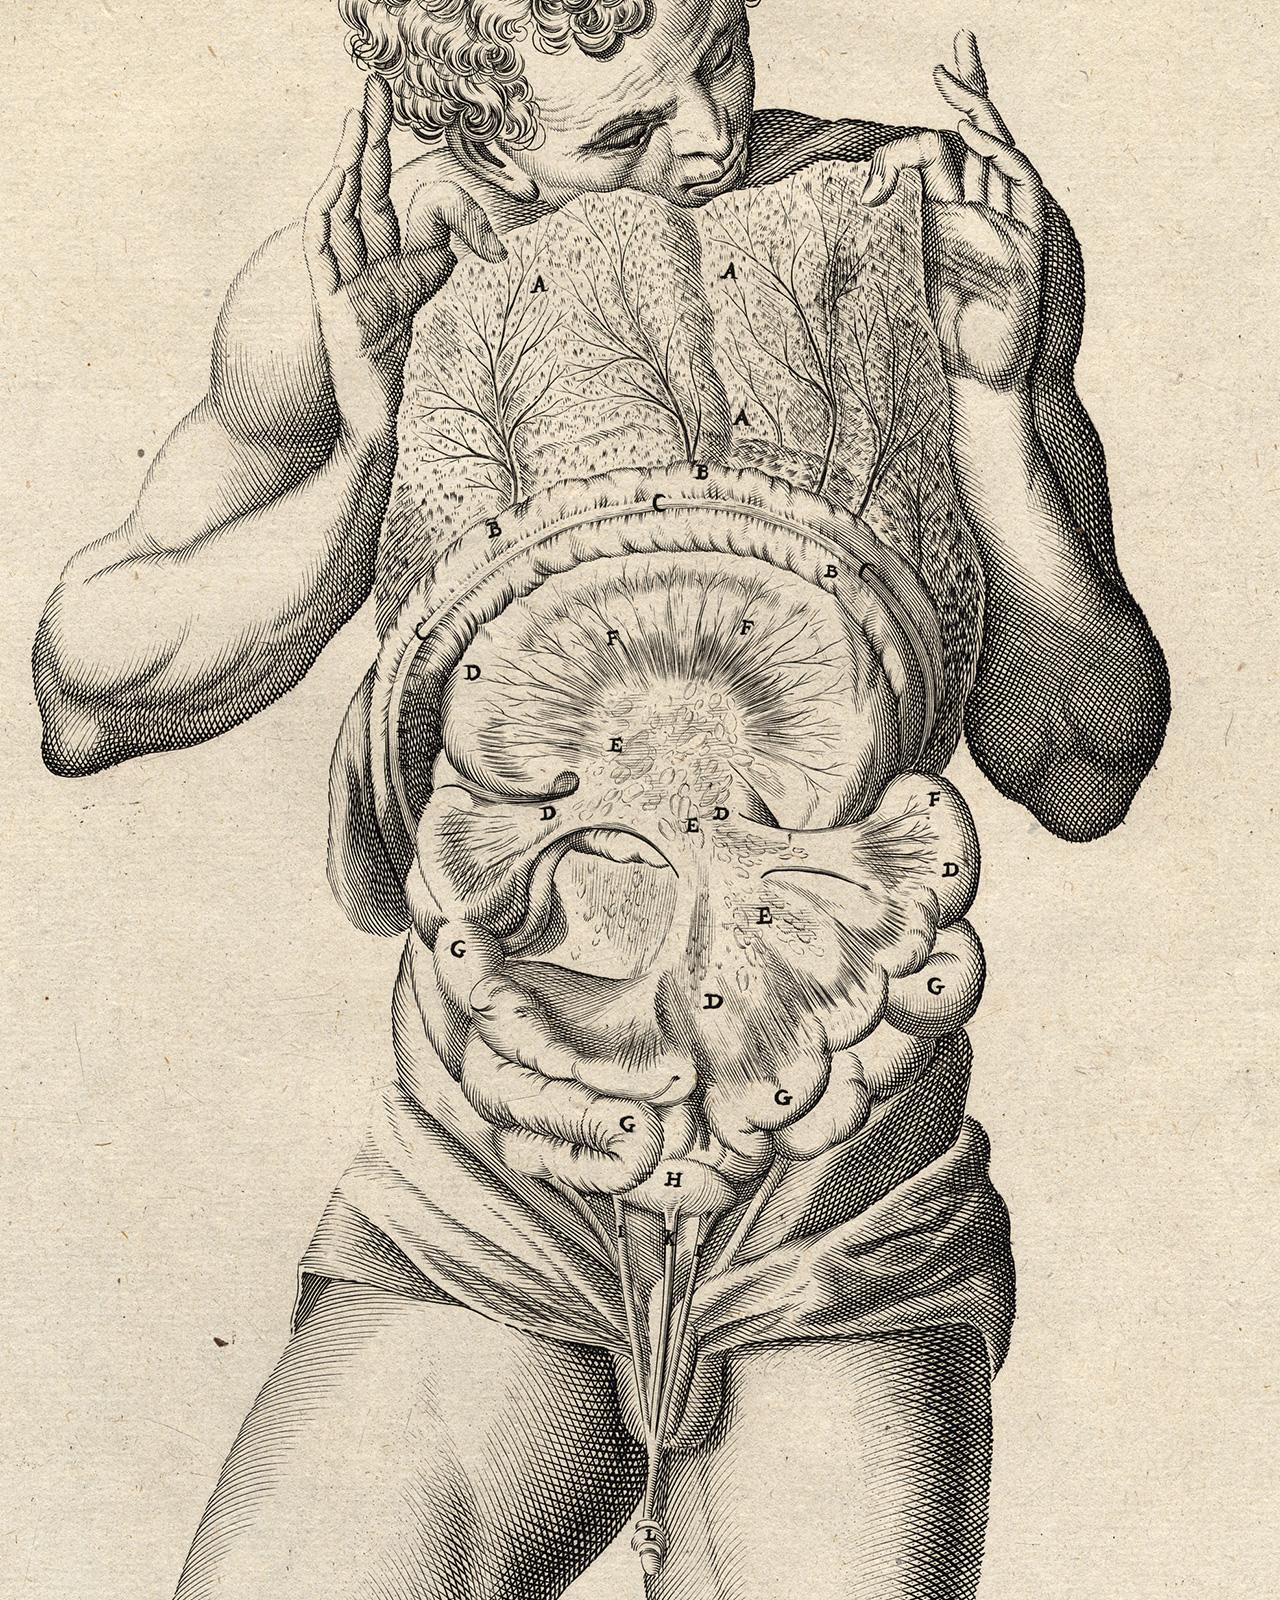 2 anatomical prints - Male abdominal cavity by Spigelius - Engraving - 17th c. - Old Masters Print by Adrianus Spigelius